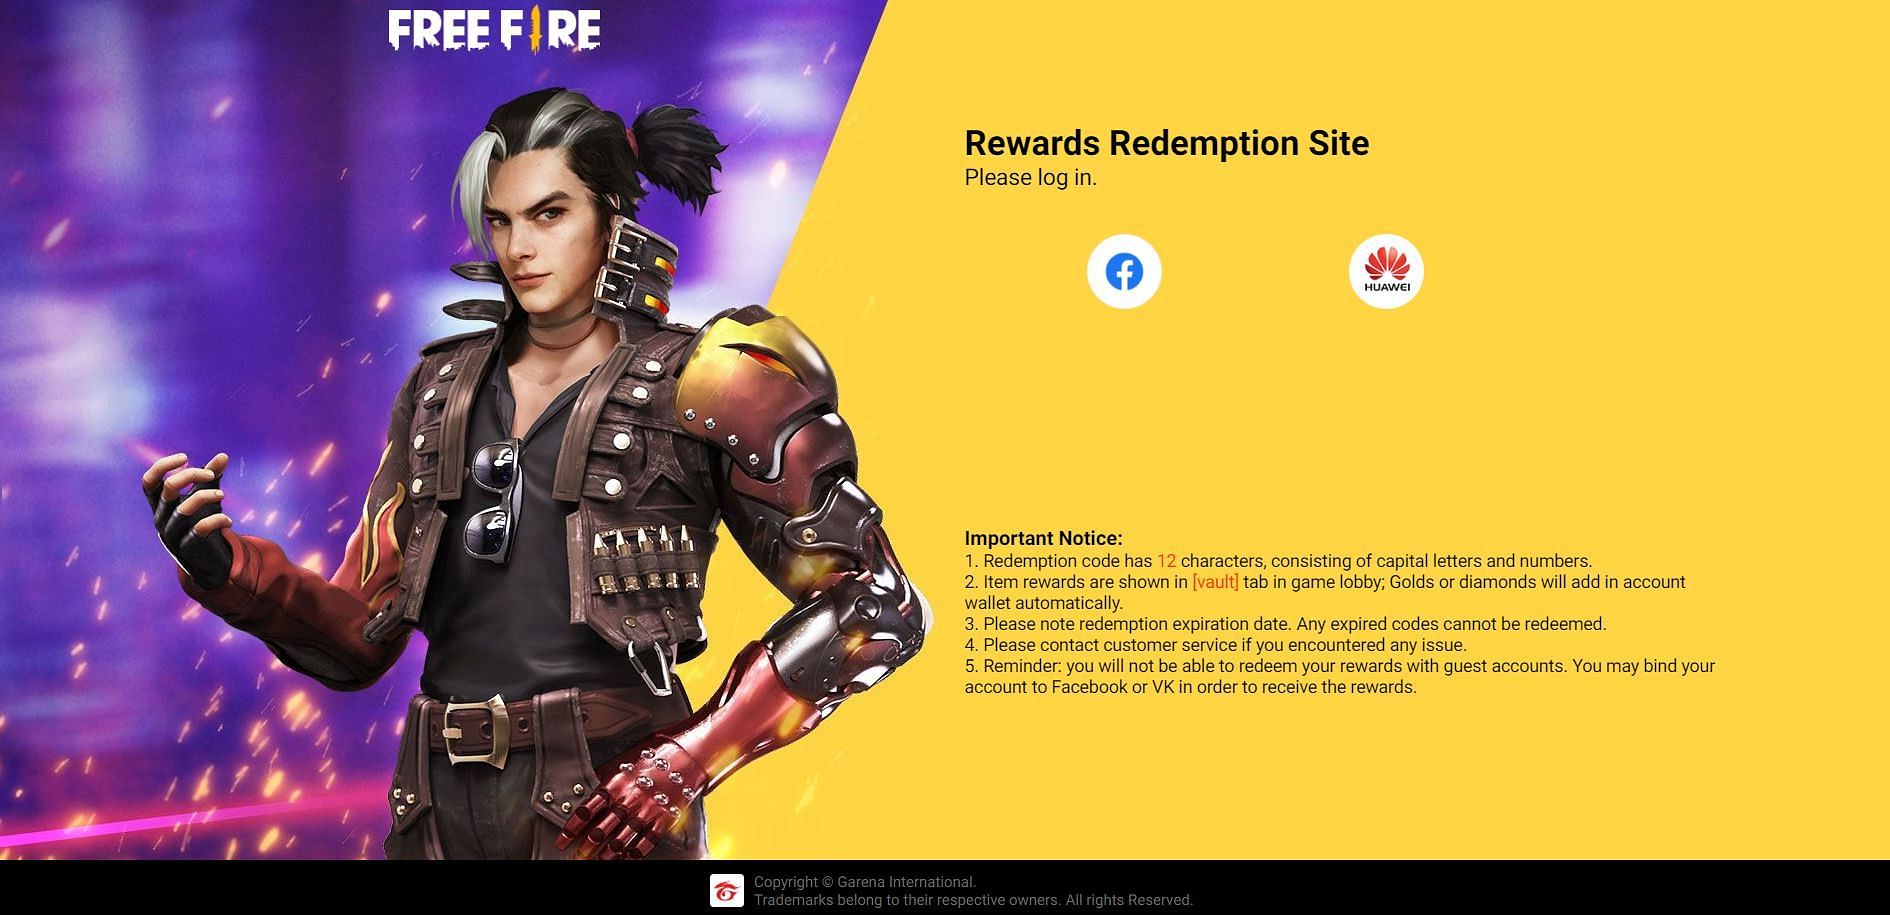 Players can use the redemption site to claim various rewards (Image via Garena)